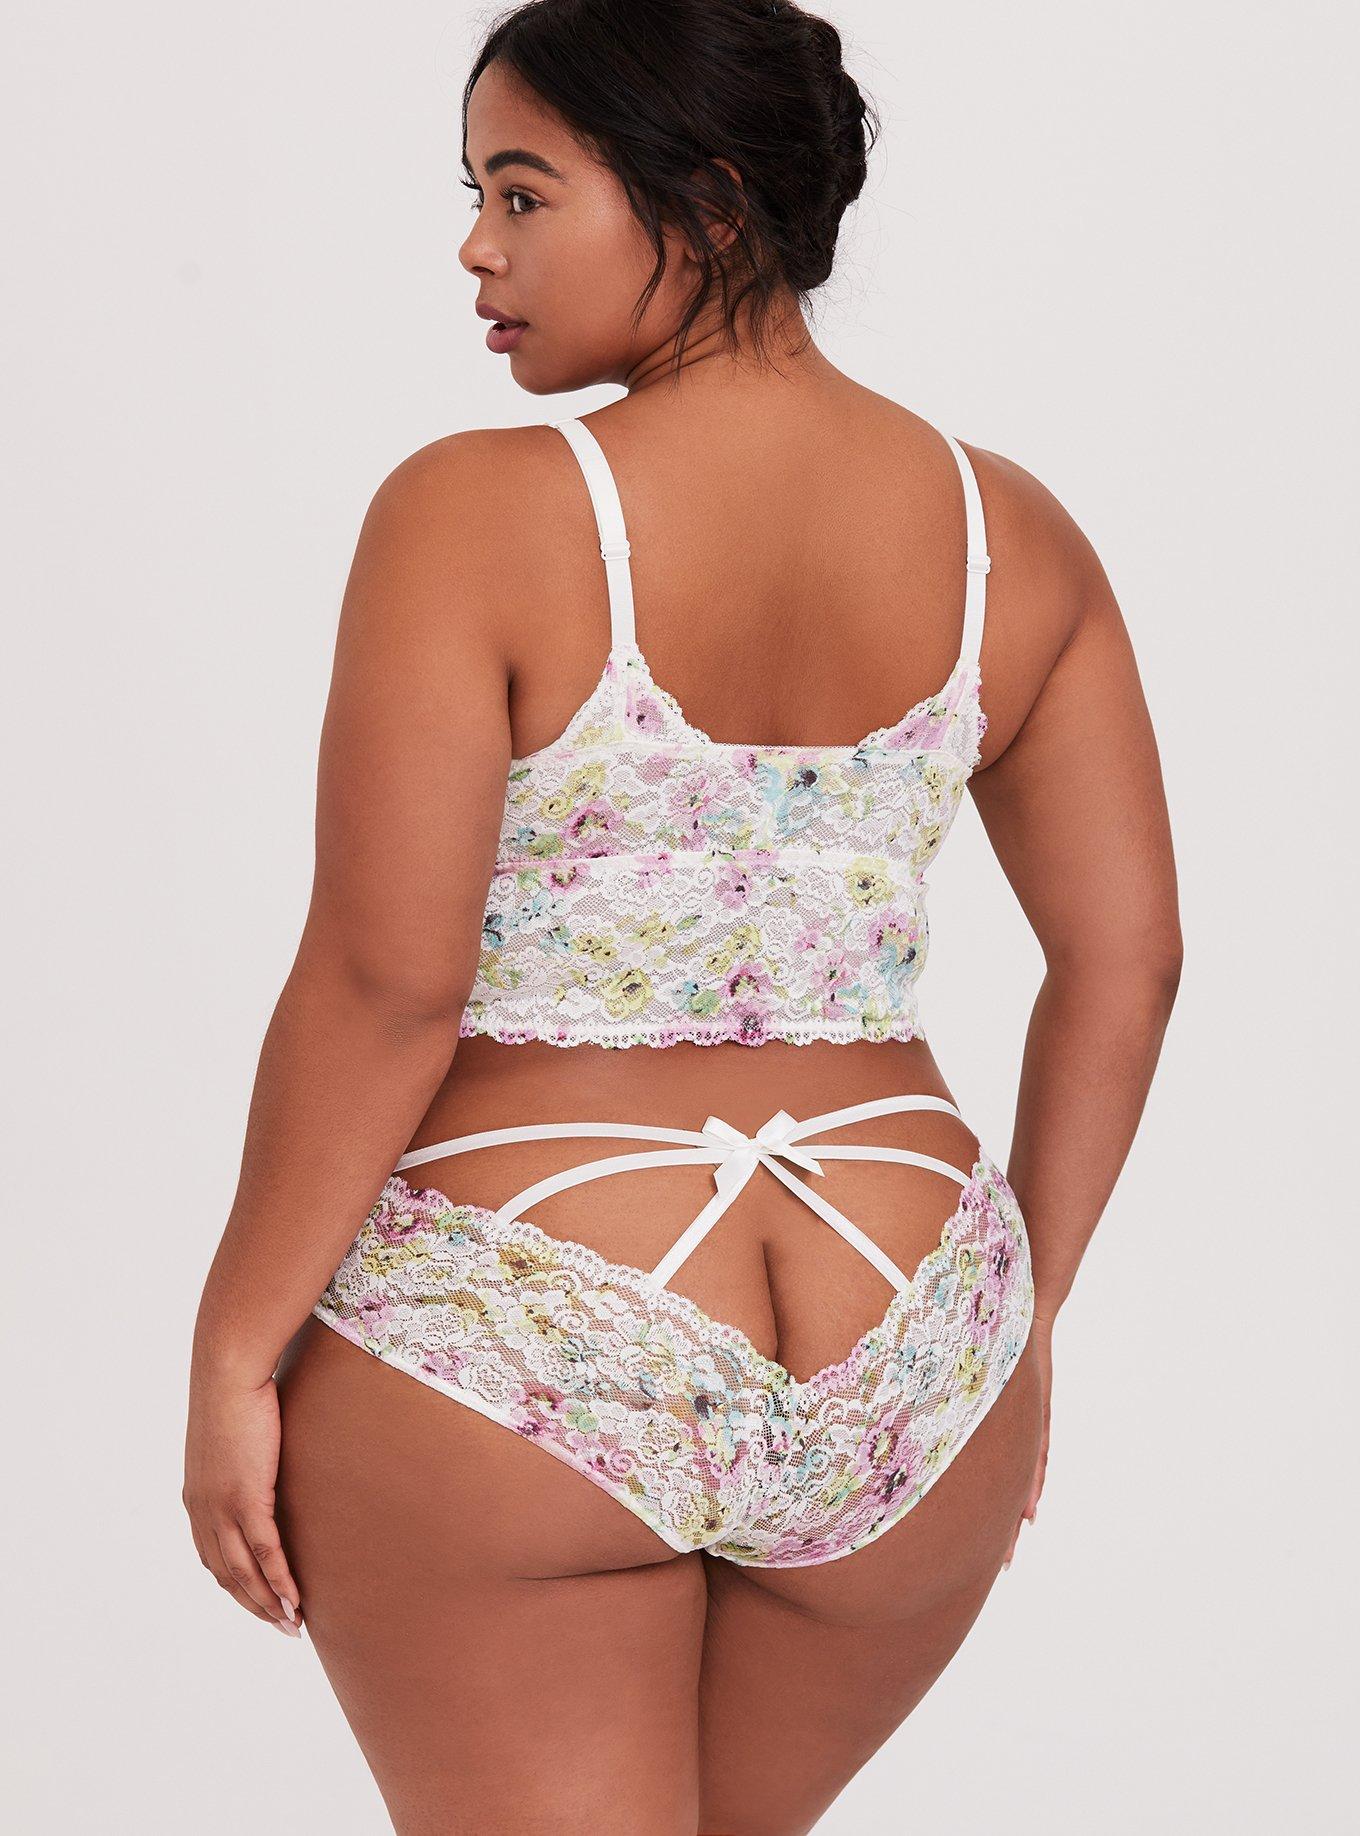 Plus Size - Simply Lace Mid-Rise Hipster Cage Back Panty - Torrid